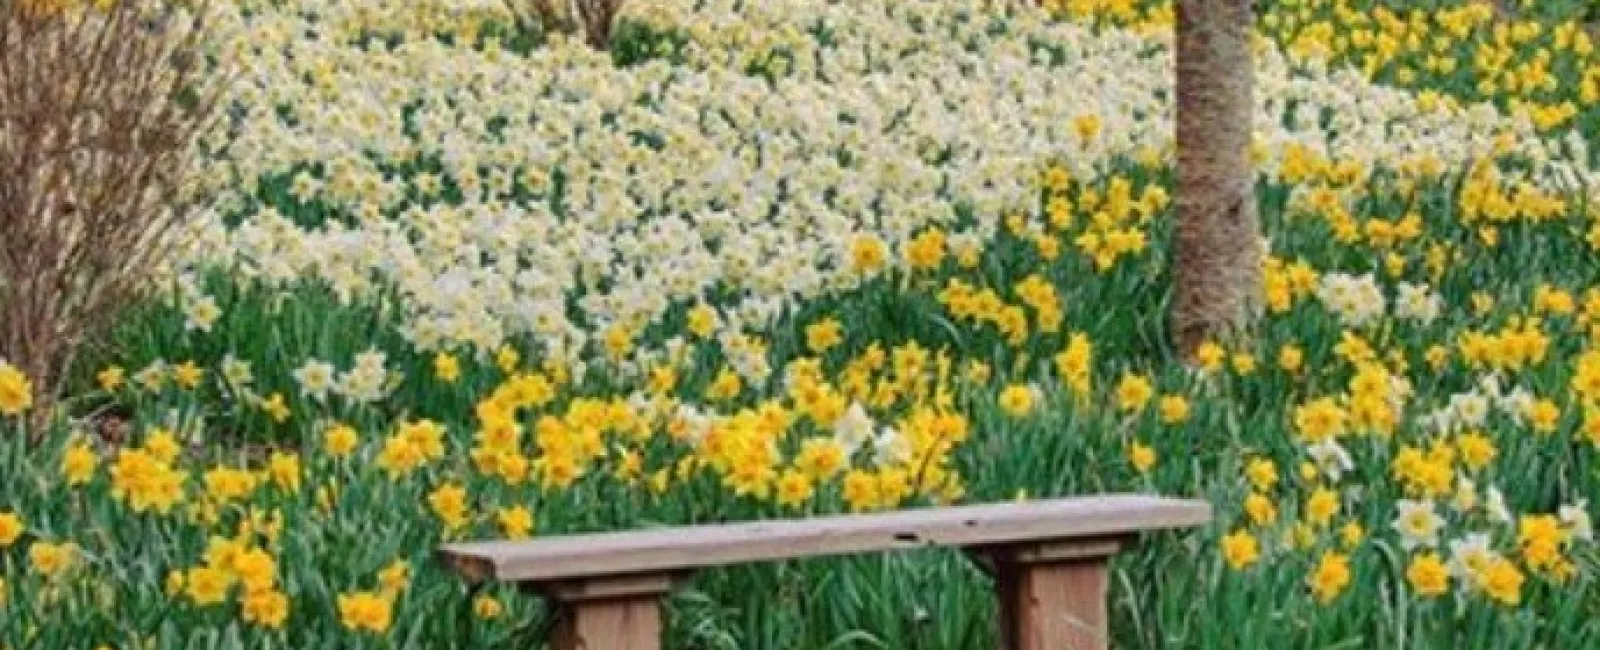 several daffodils in a park